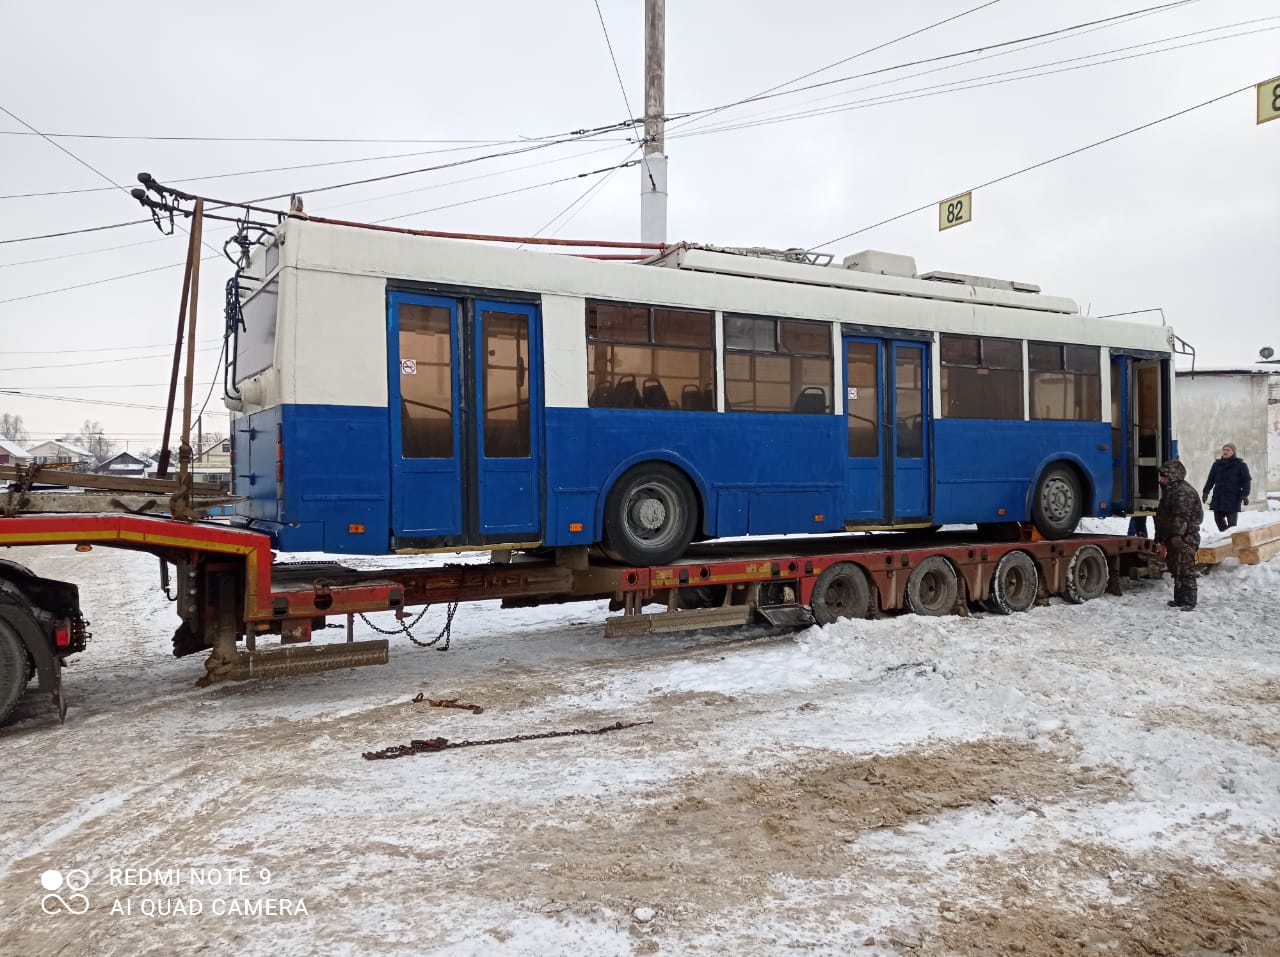 Kostroma — Trolleybuses without numbers